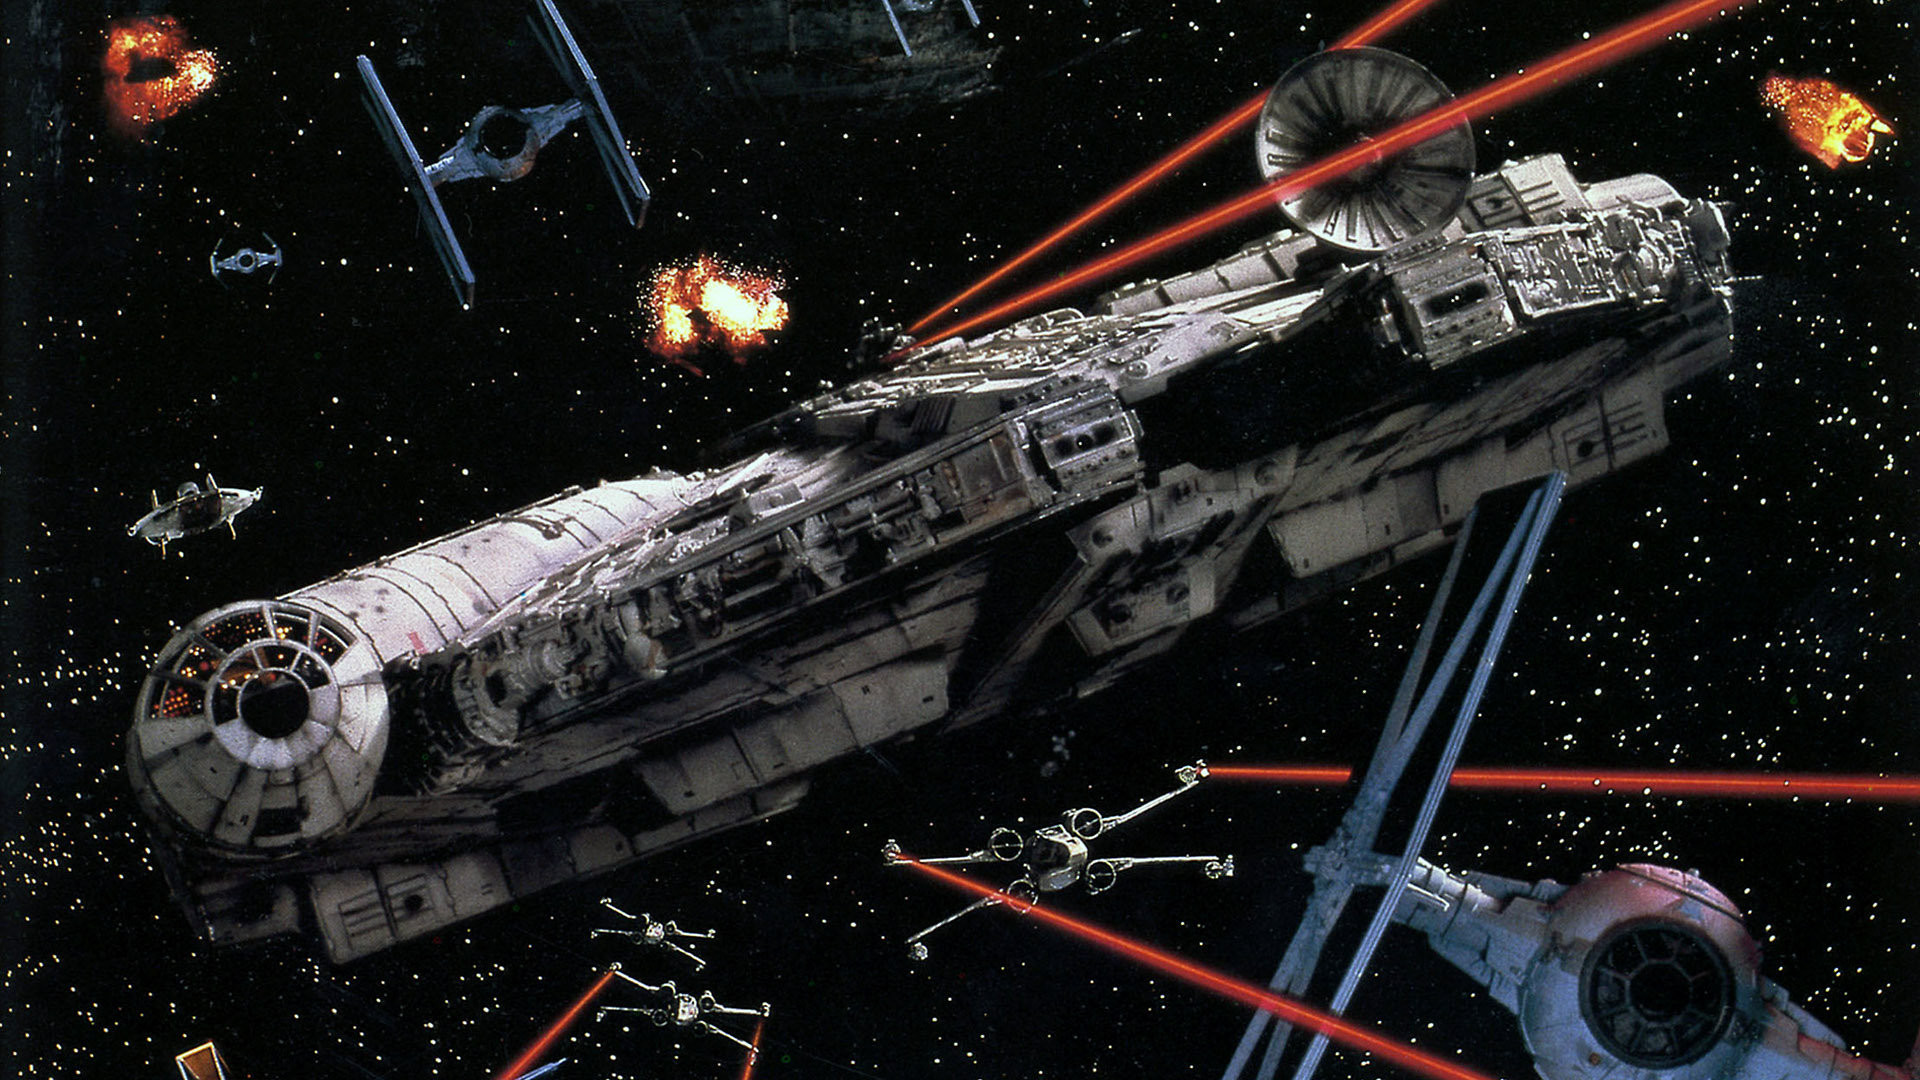 1920x1080 30 Star Wars Episode VI: Return Of The Jedi HD Wallpapers | Backgrounds -  Wallpaper Abyss